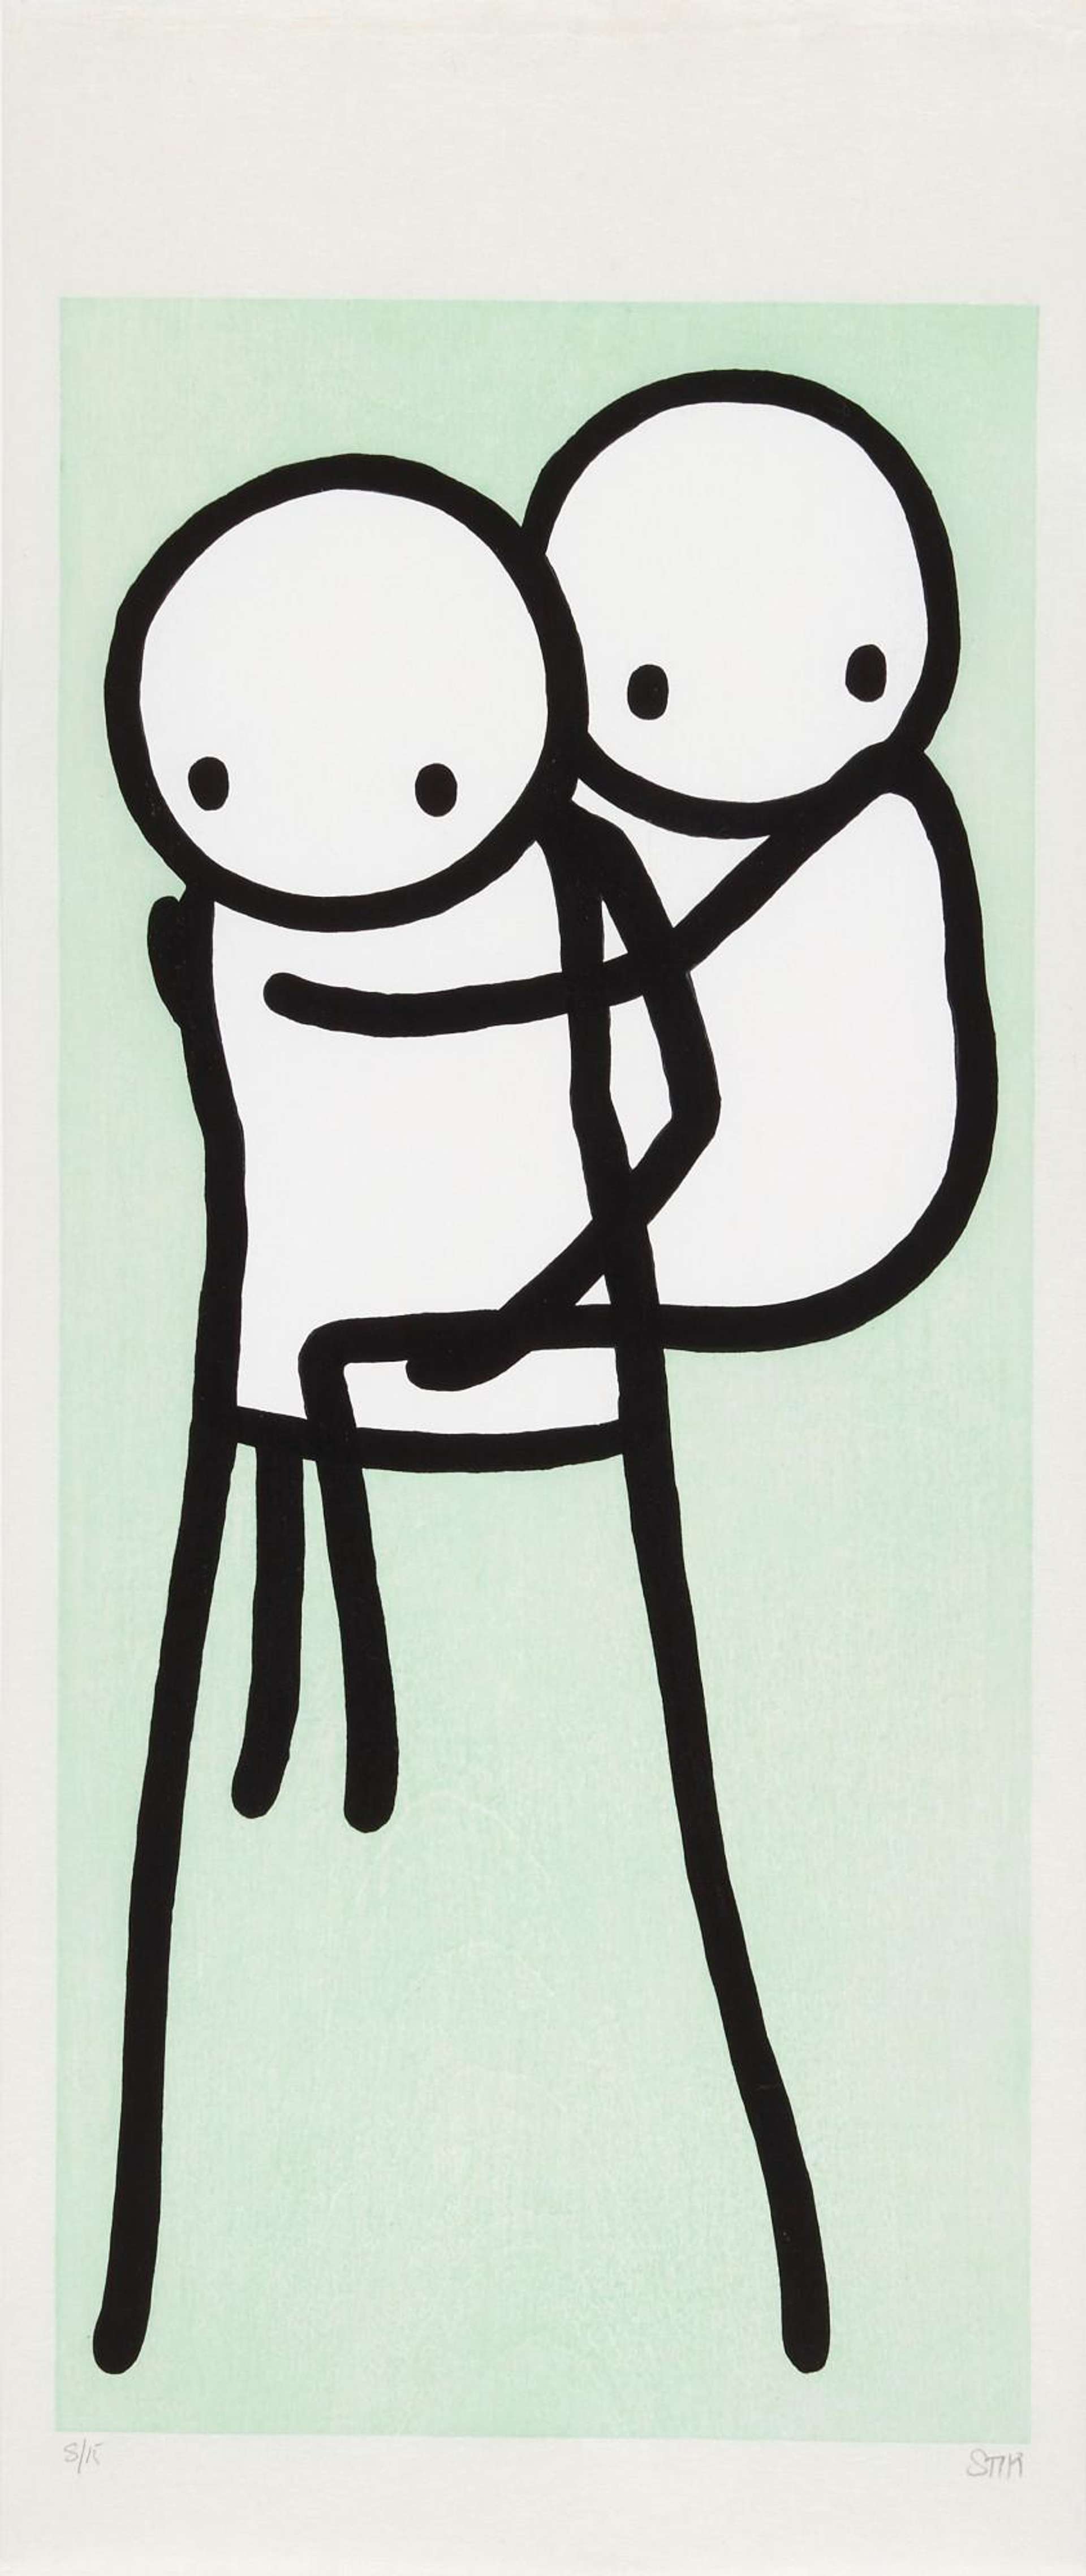 STIK’s Onbu (green). A screenprint of two stick figures, one riding on the back of the other that is standing up.